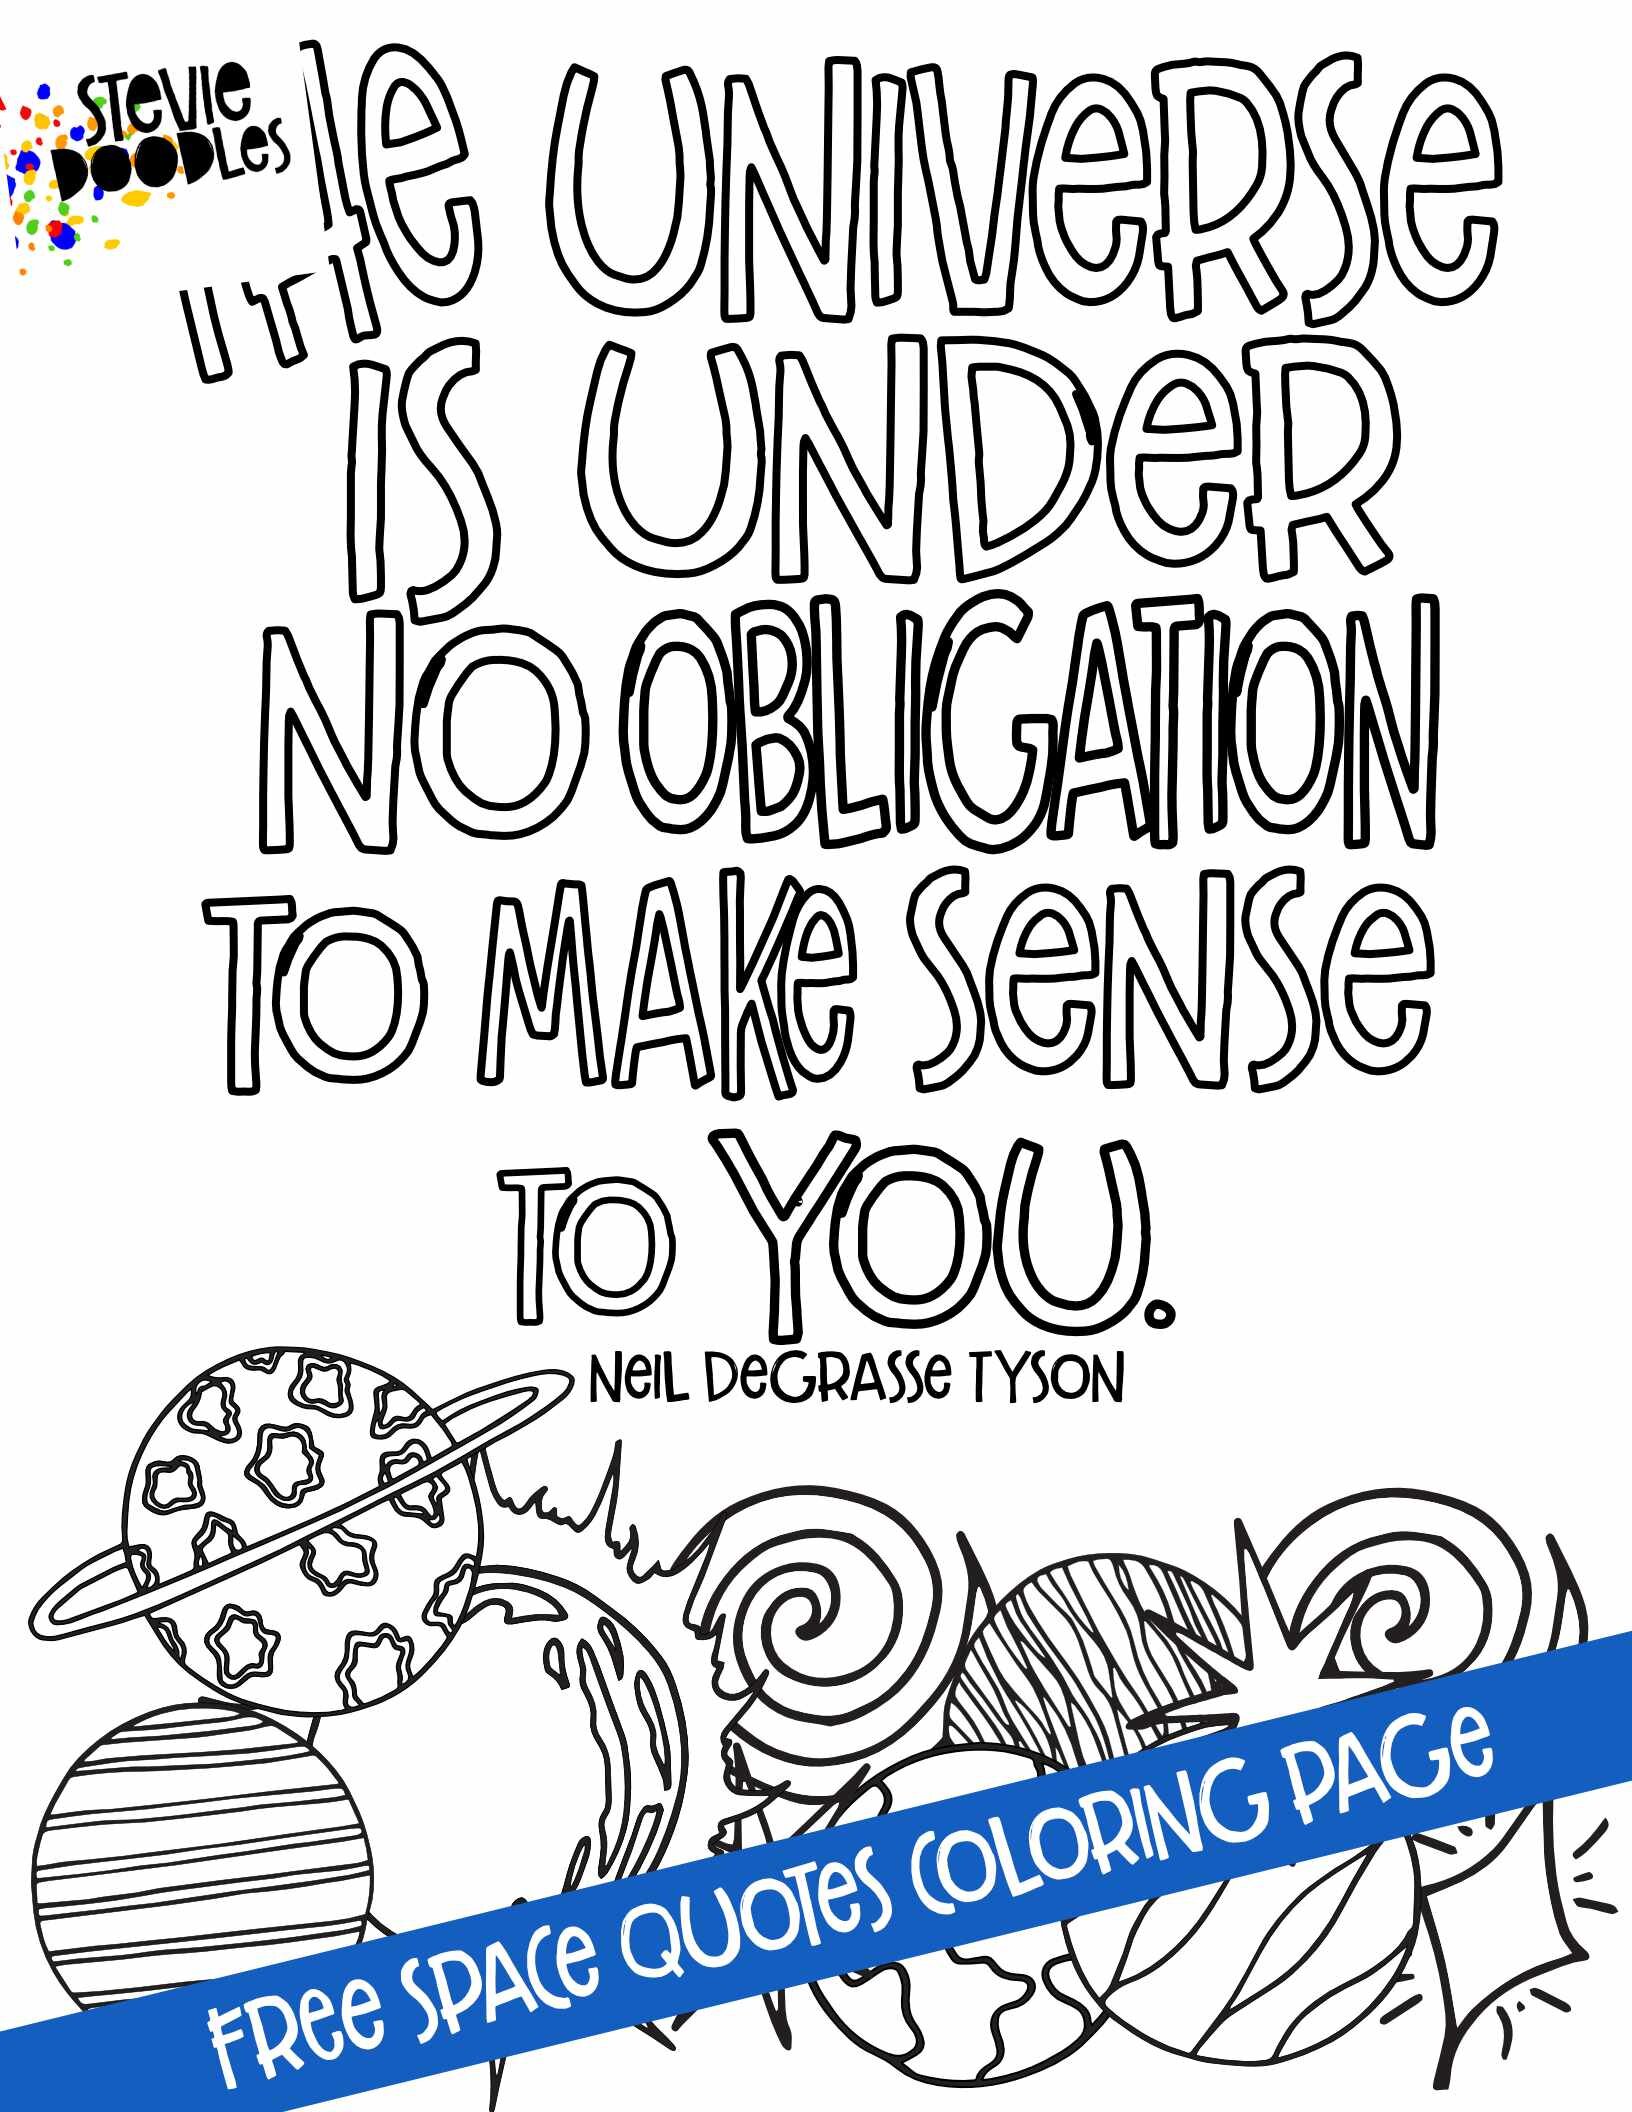 8 Free Space quote coloring pages from Stevie Doodles - free to print and color today